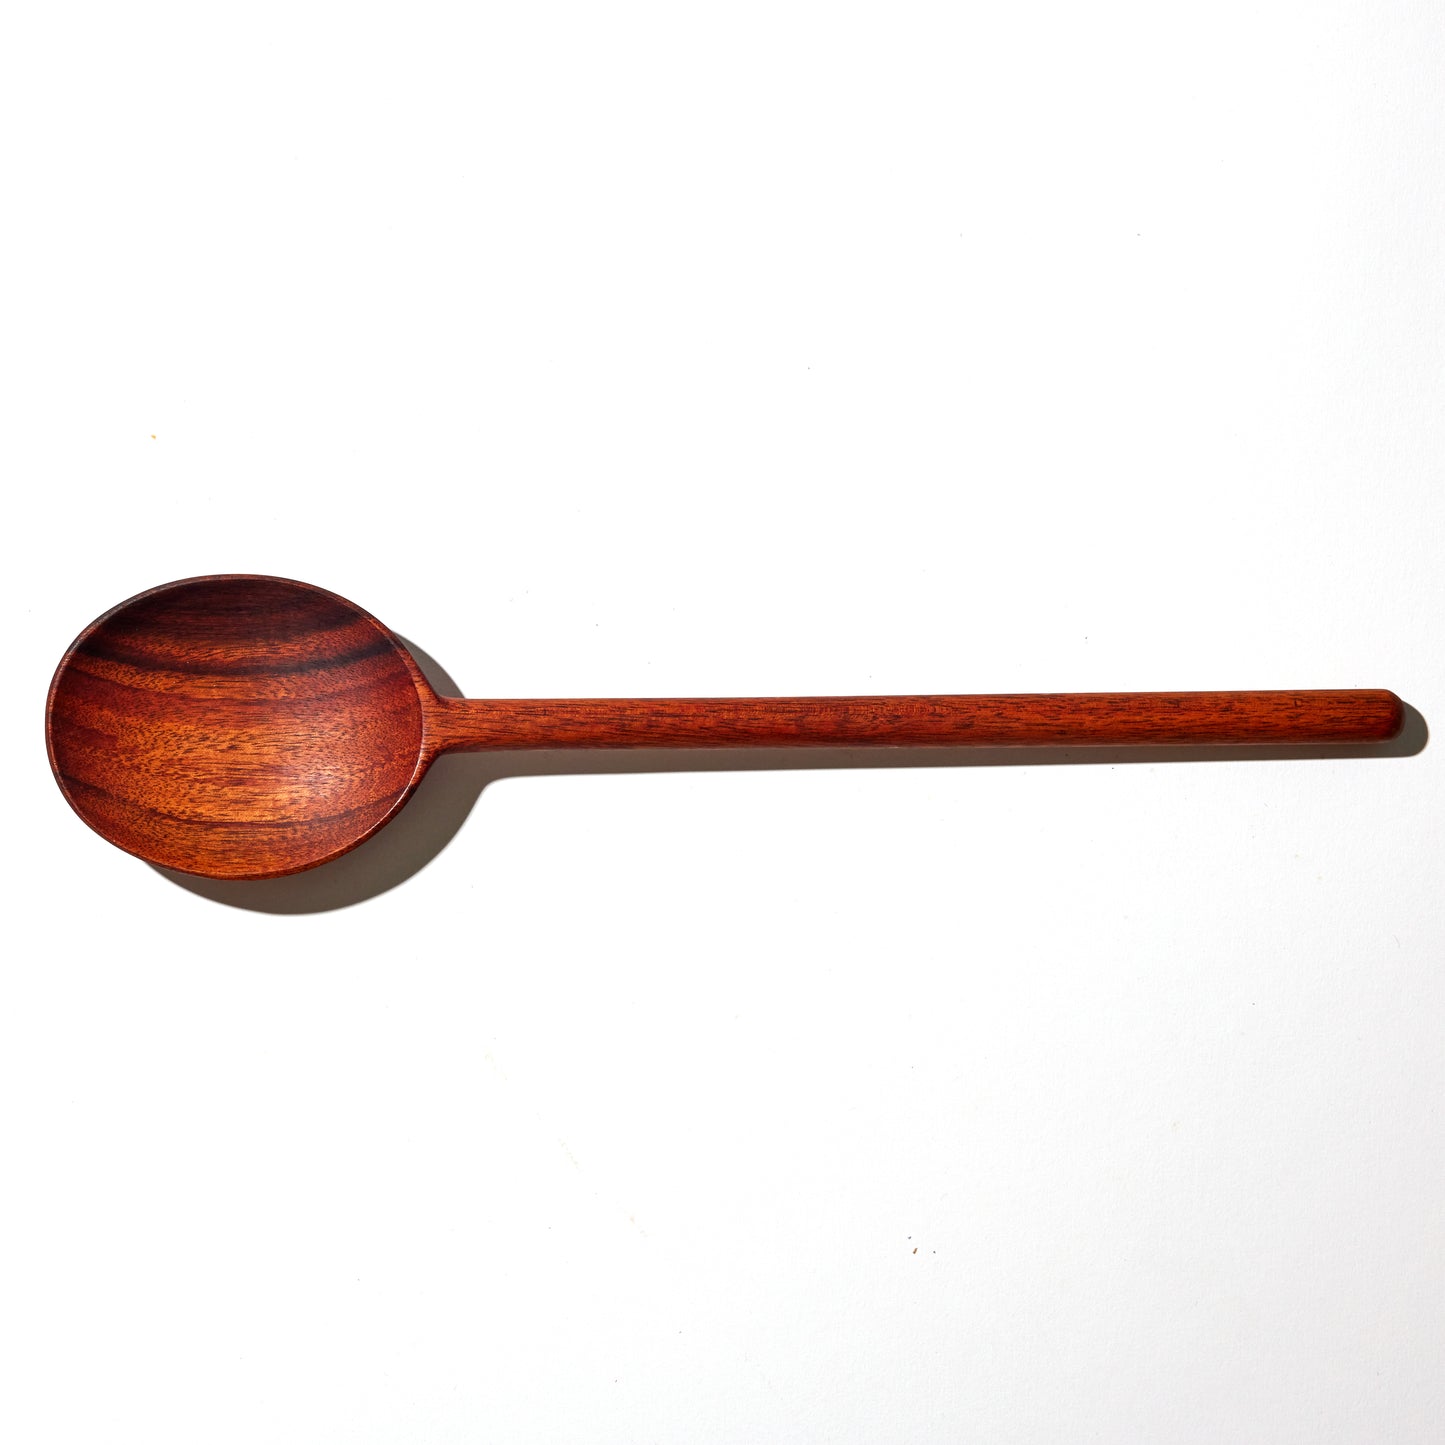 Large Wooden Cooking Spoon - Housewarming Kitchen Gift